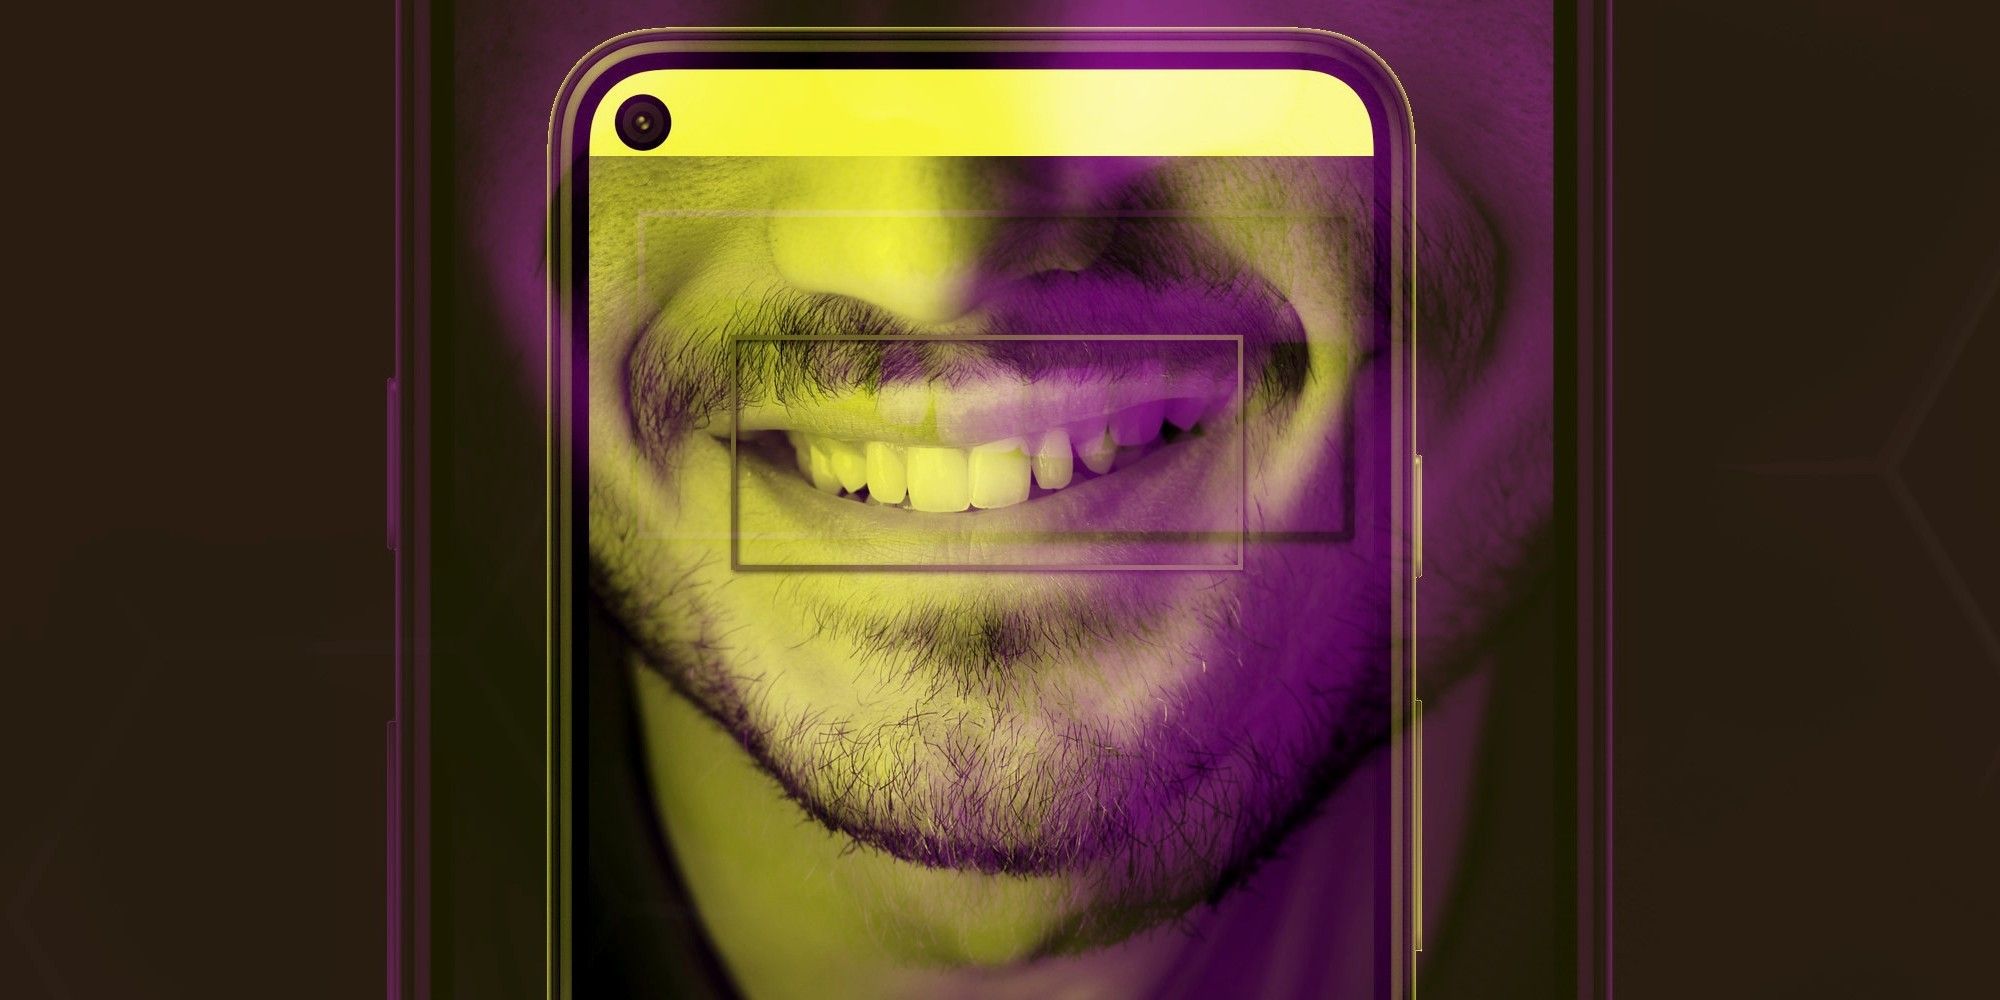 Could Teeth Replace Face & Fingerprint Unlock In The Future?